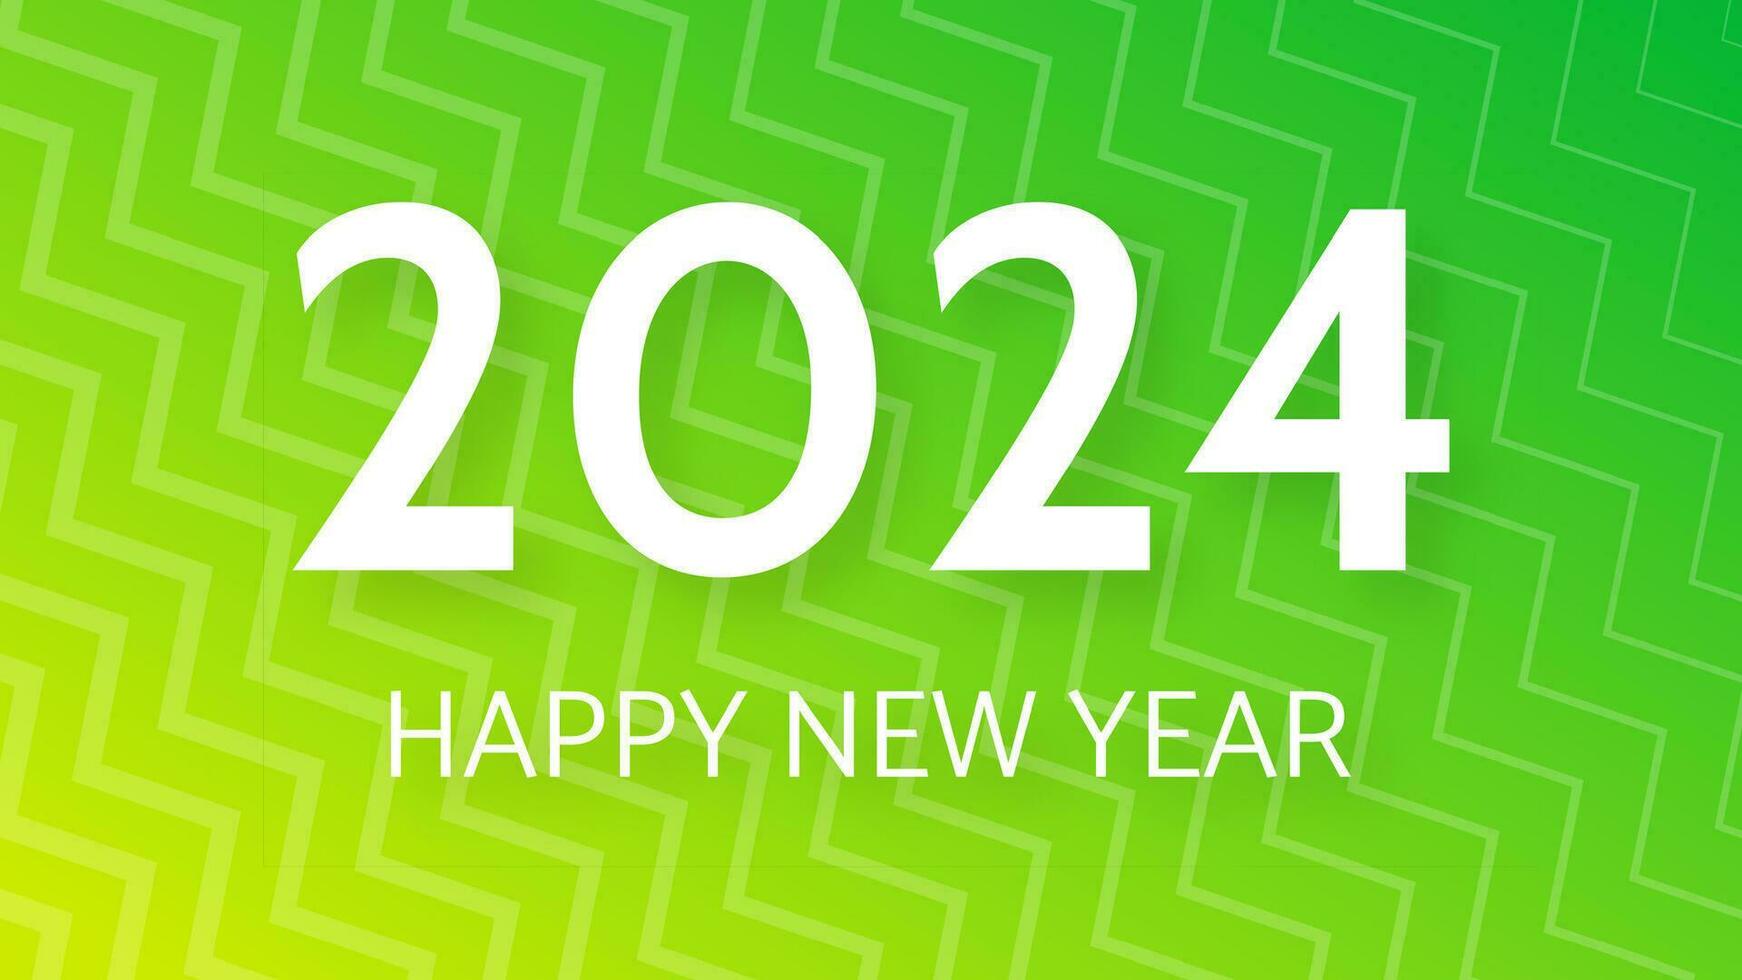 2024 Happy New Year on colorful background vector